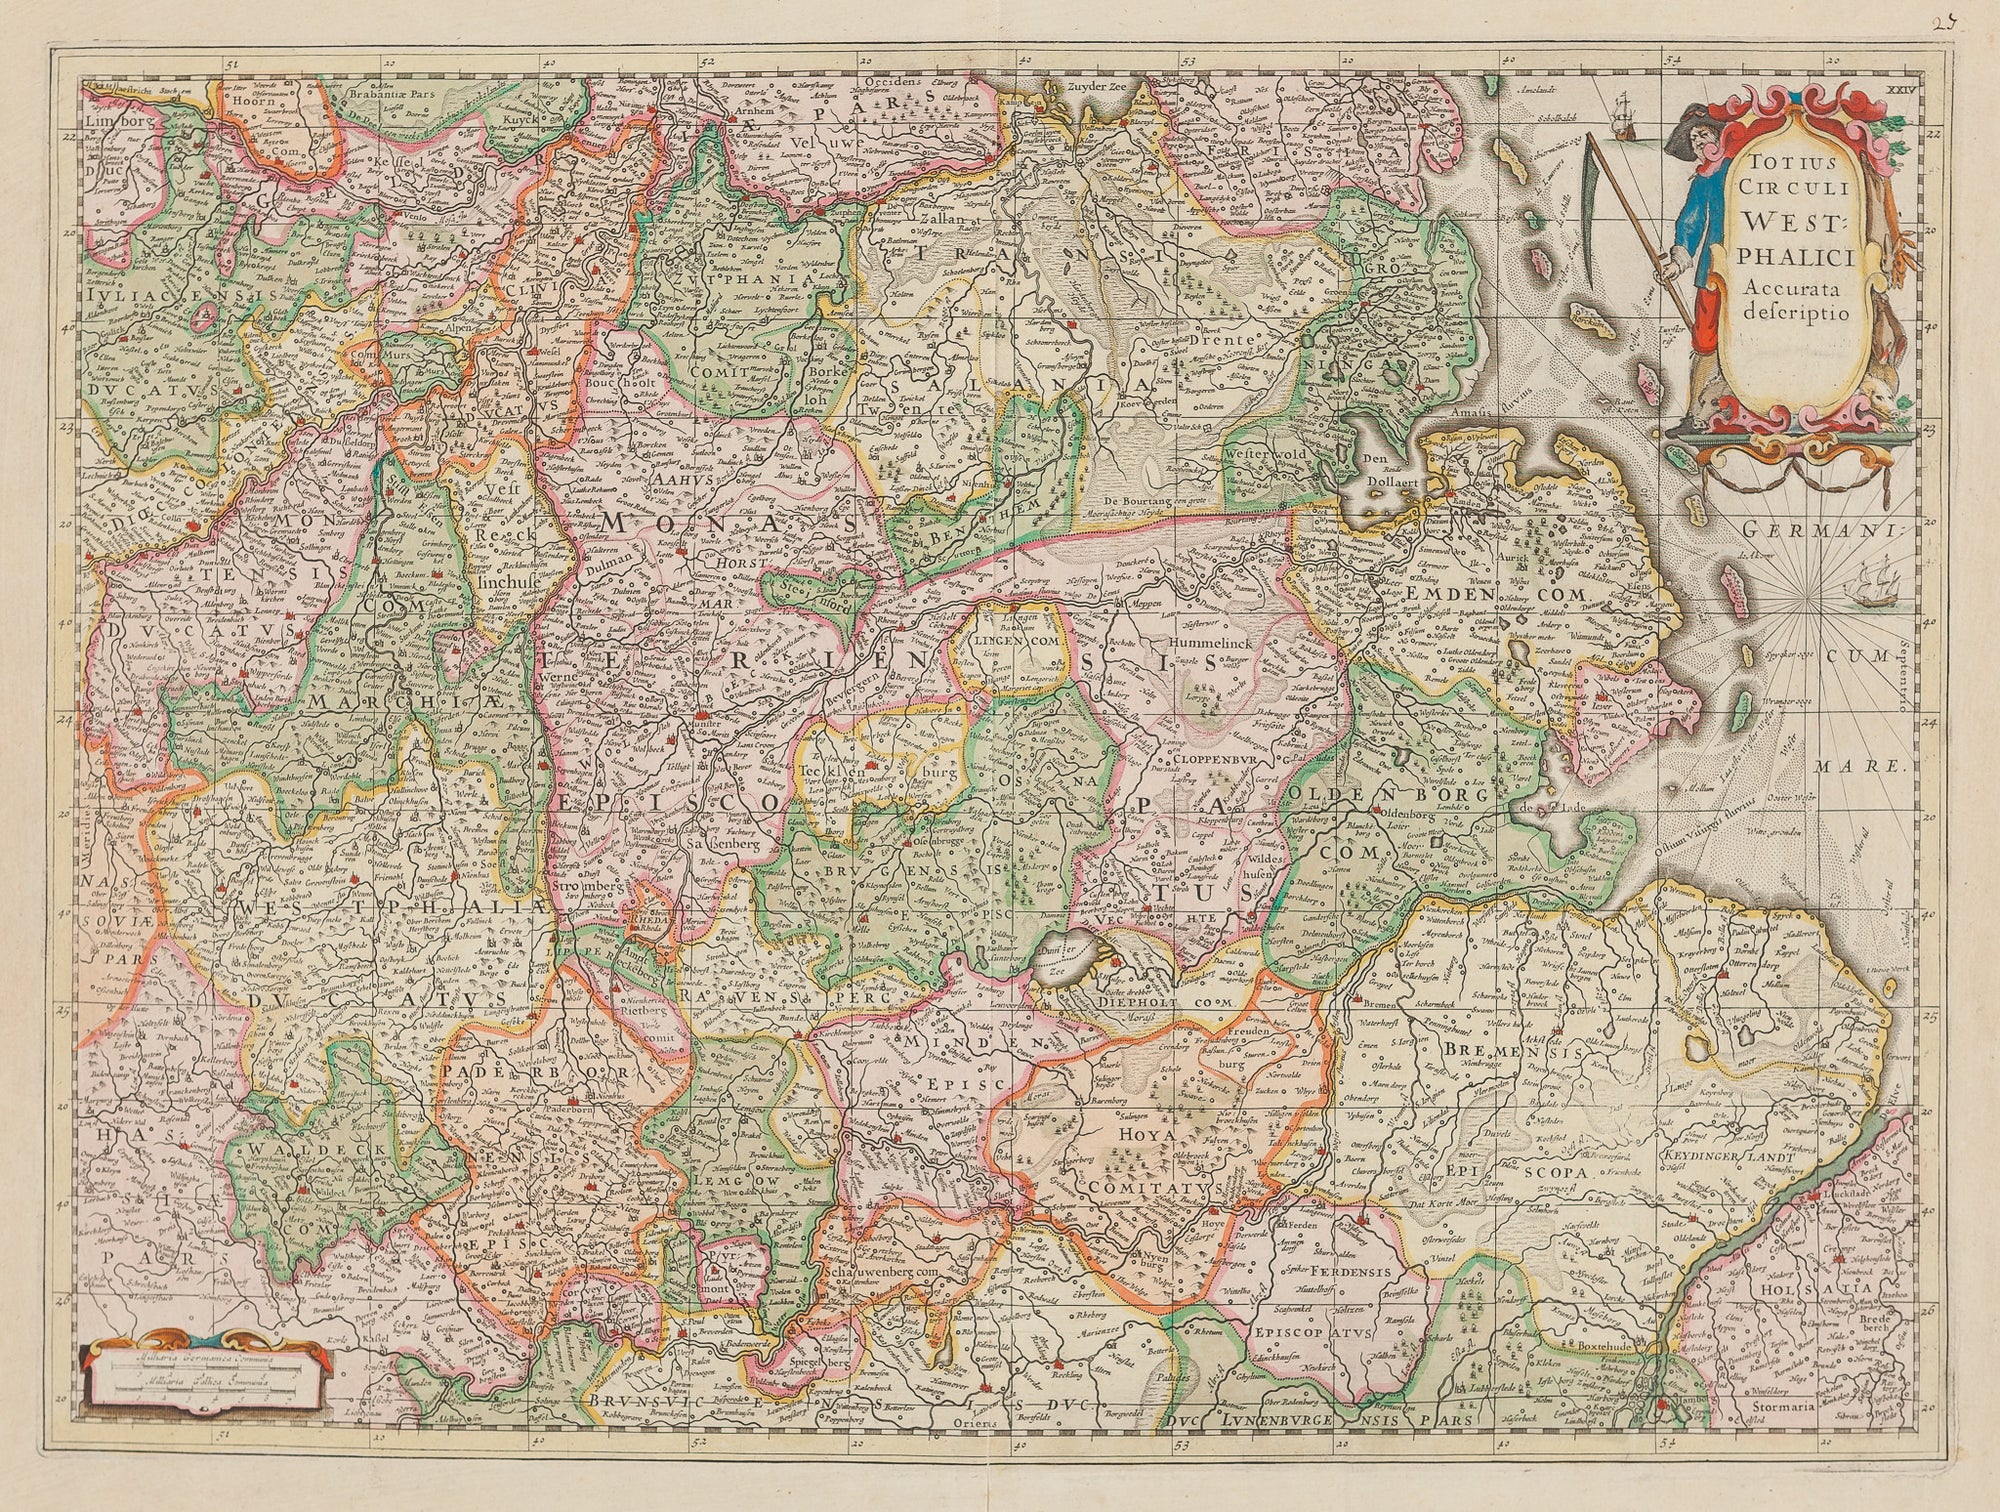 Antique print. 'Totius Circuli West Phalici Accurata descriptio' , contemporary handcoloured engraved map of Westfalen published by Henricus Hondius in 1639. It shows areas and places like: Hamburg, Groningen, Koln and Munster, Ameland, Drenthe.